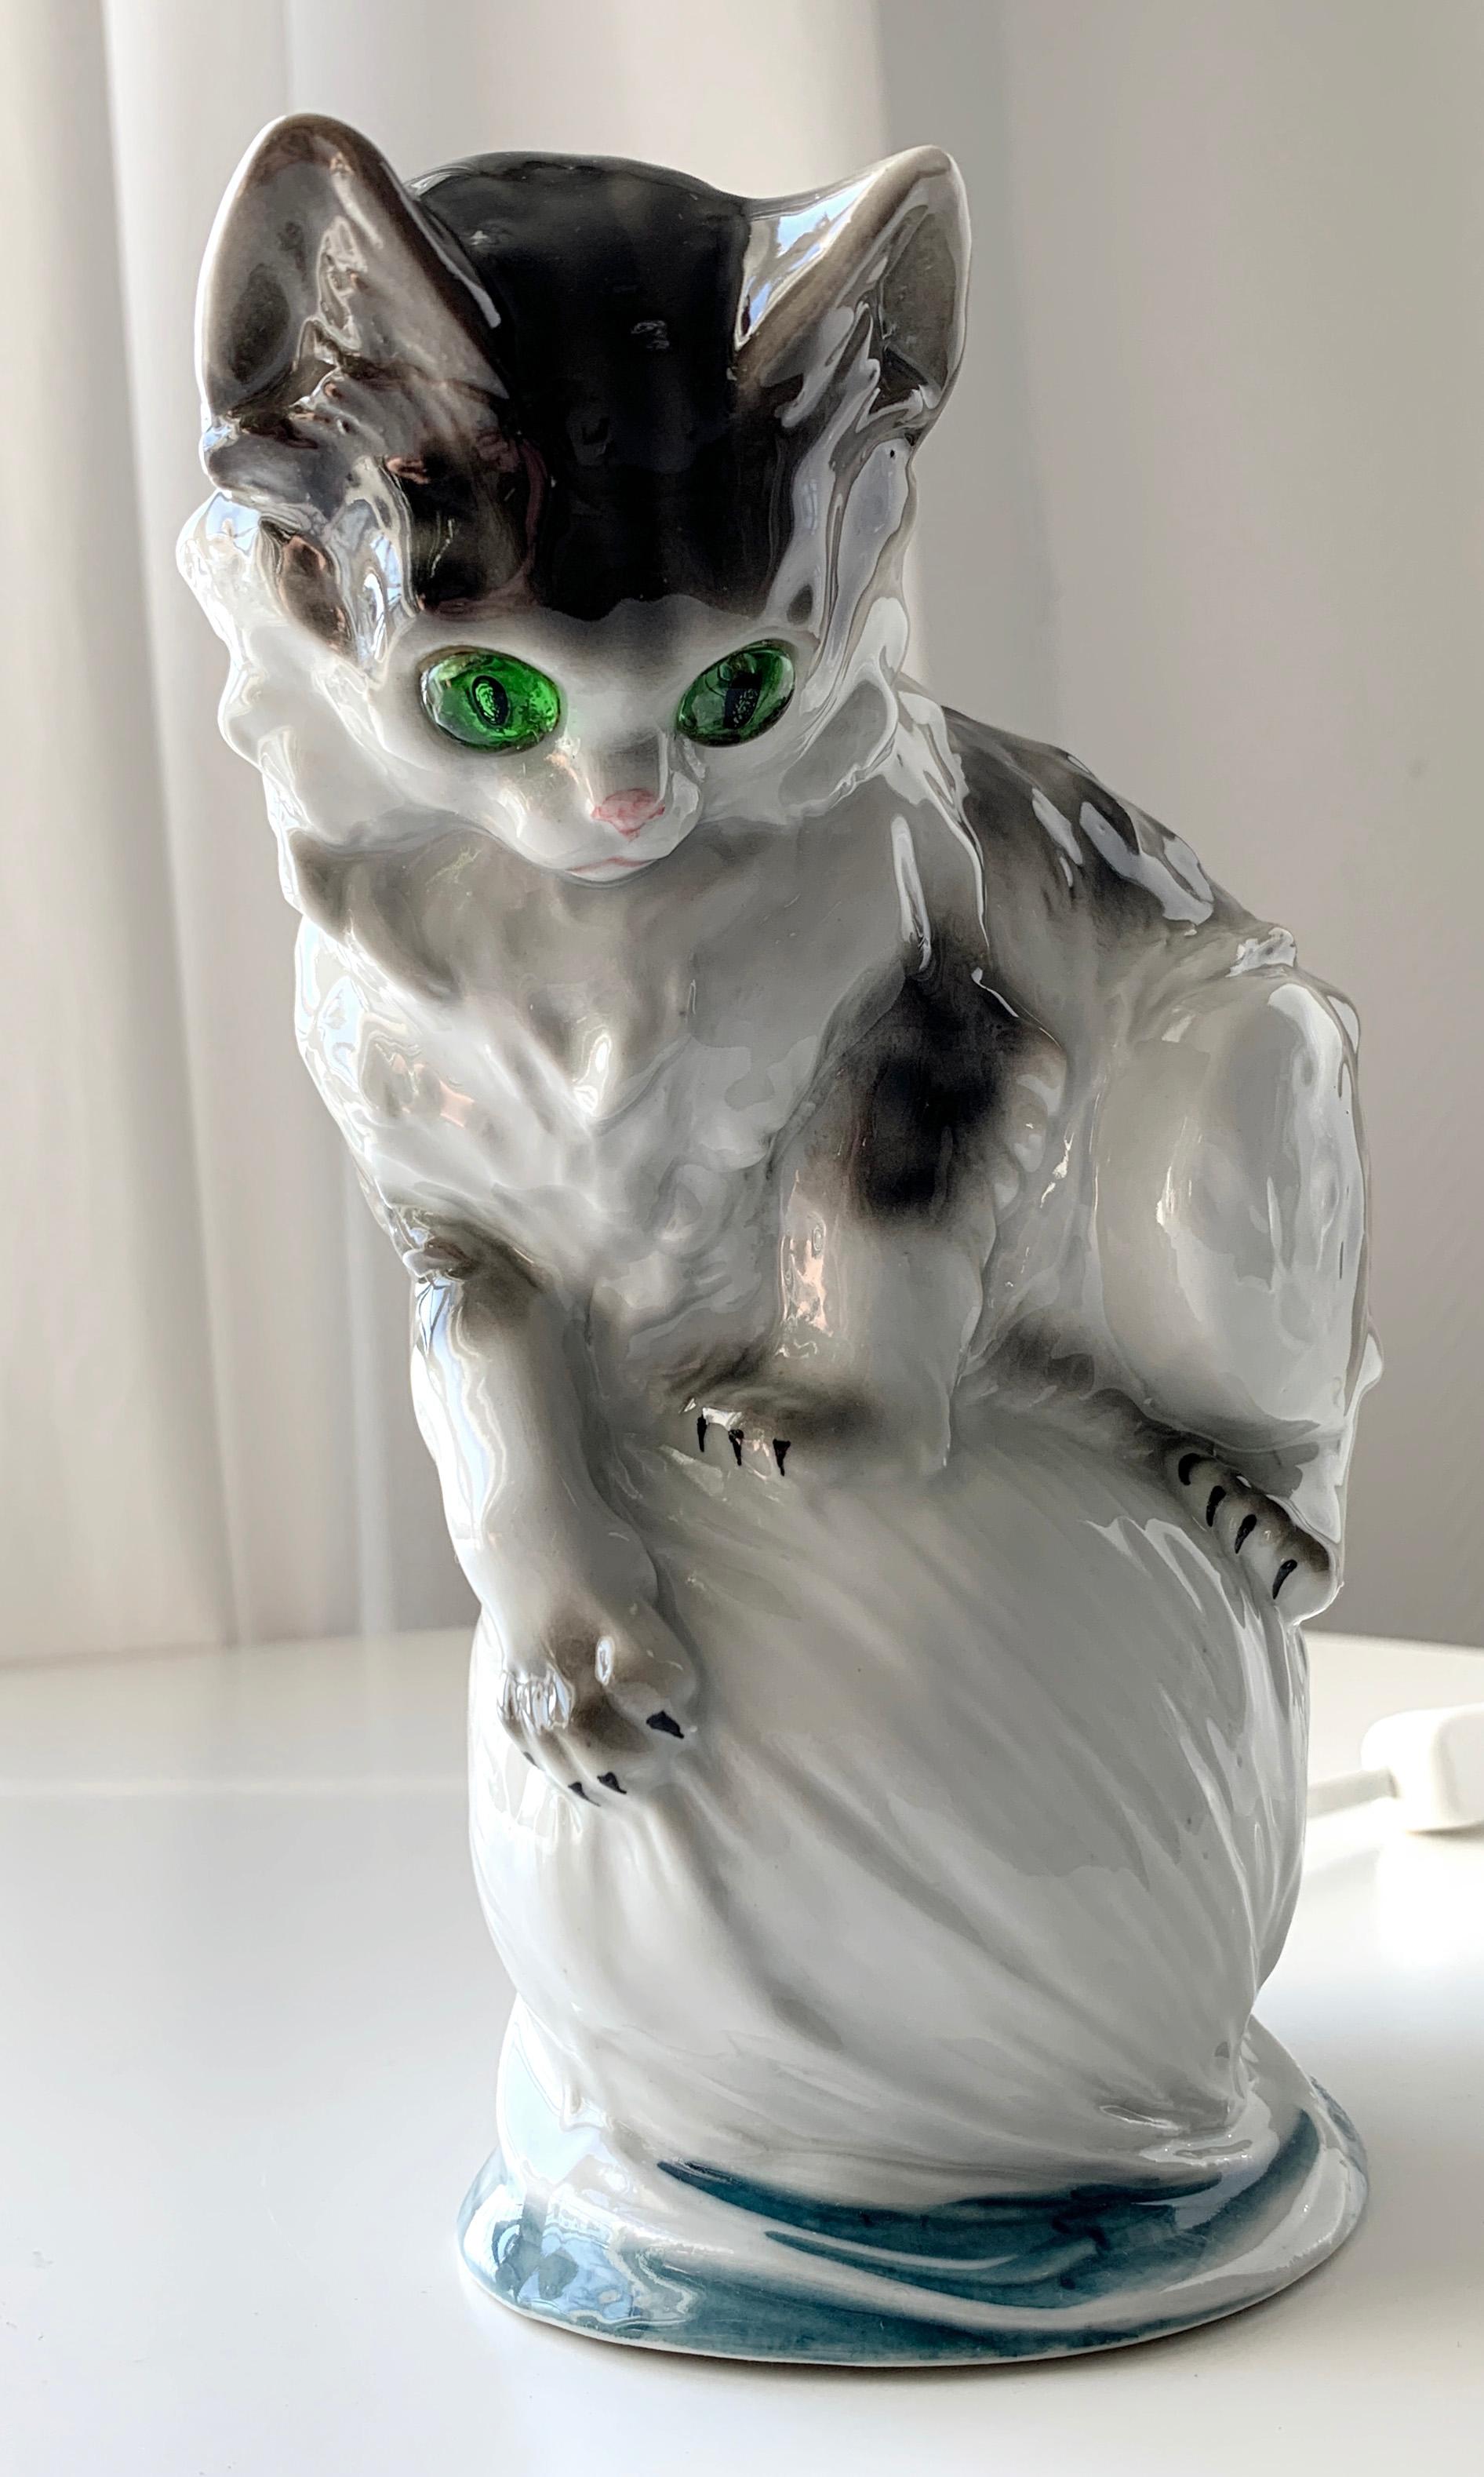 Figurine porcellain lamp with cat balancing on a yarn nest. Early 20th century ozon table lamp. White porcelain hand painted with joyful colors. Electrically mounting could be done by Danish Fog & Mørup. Similar figurines seens as a series of